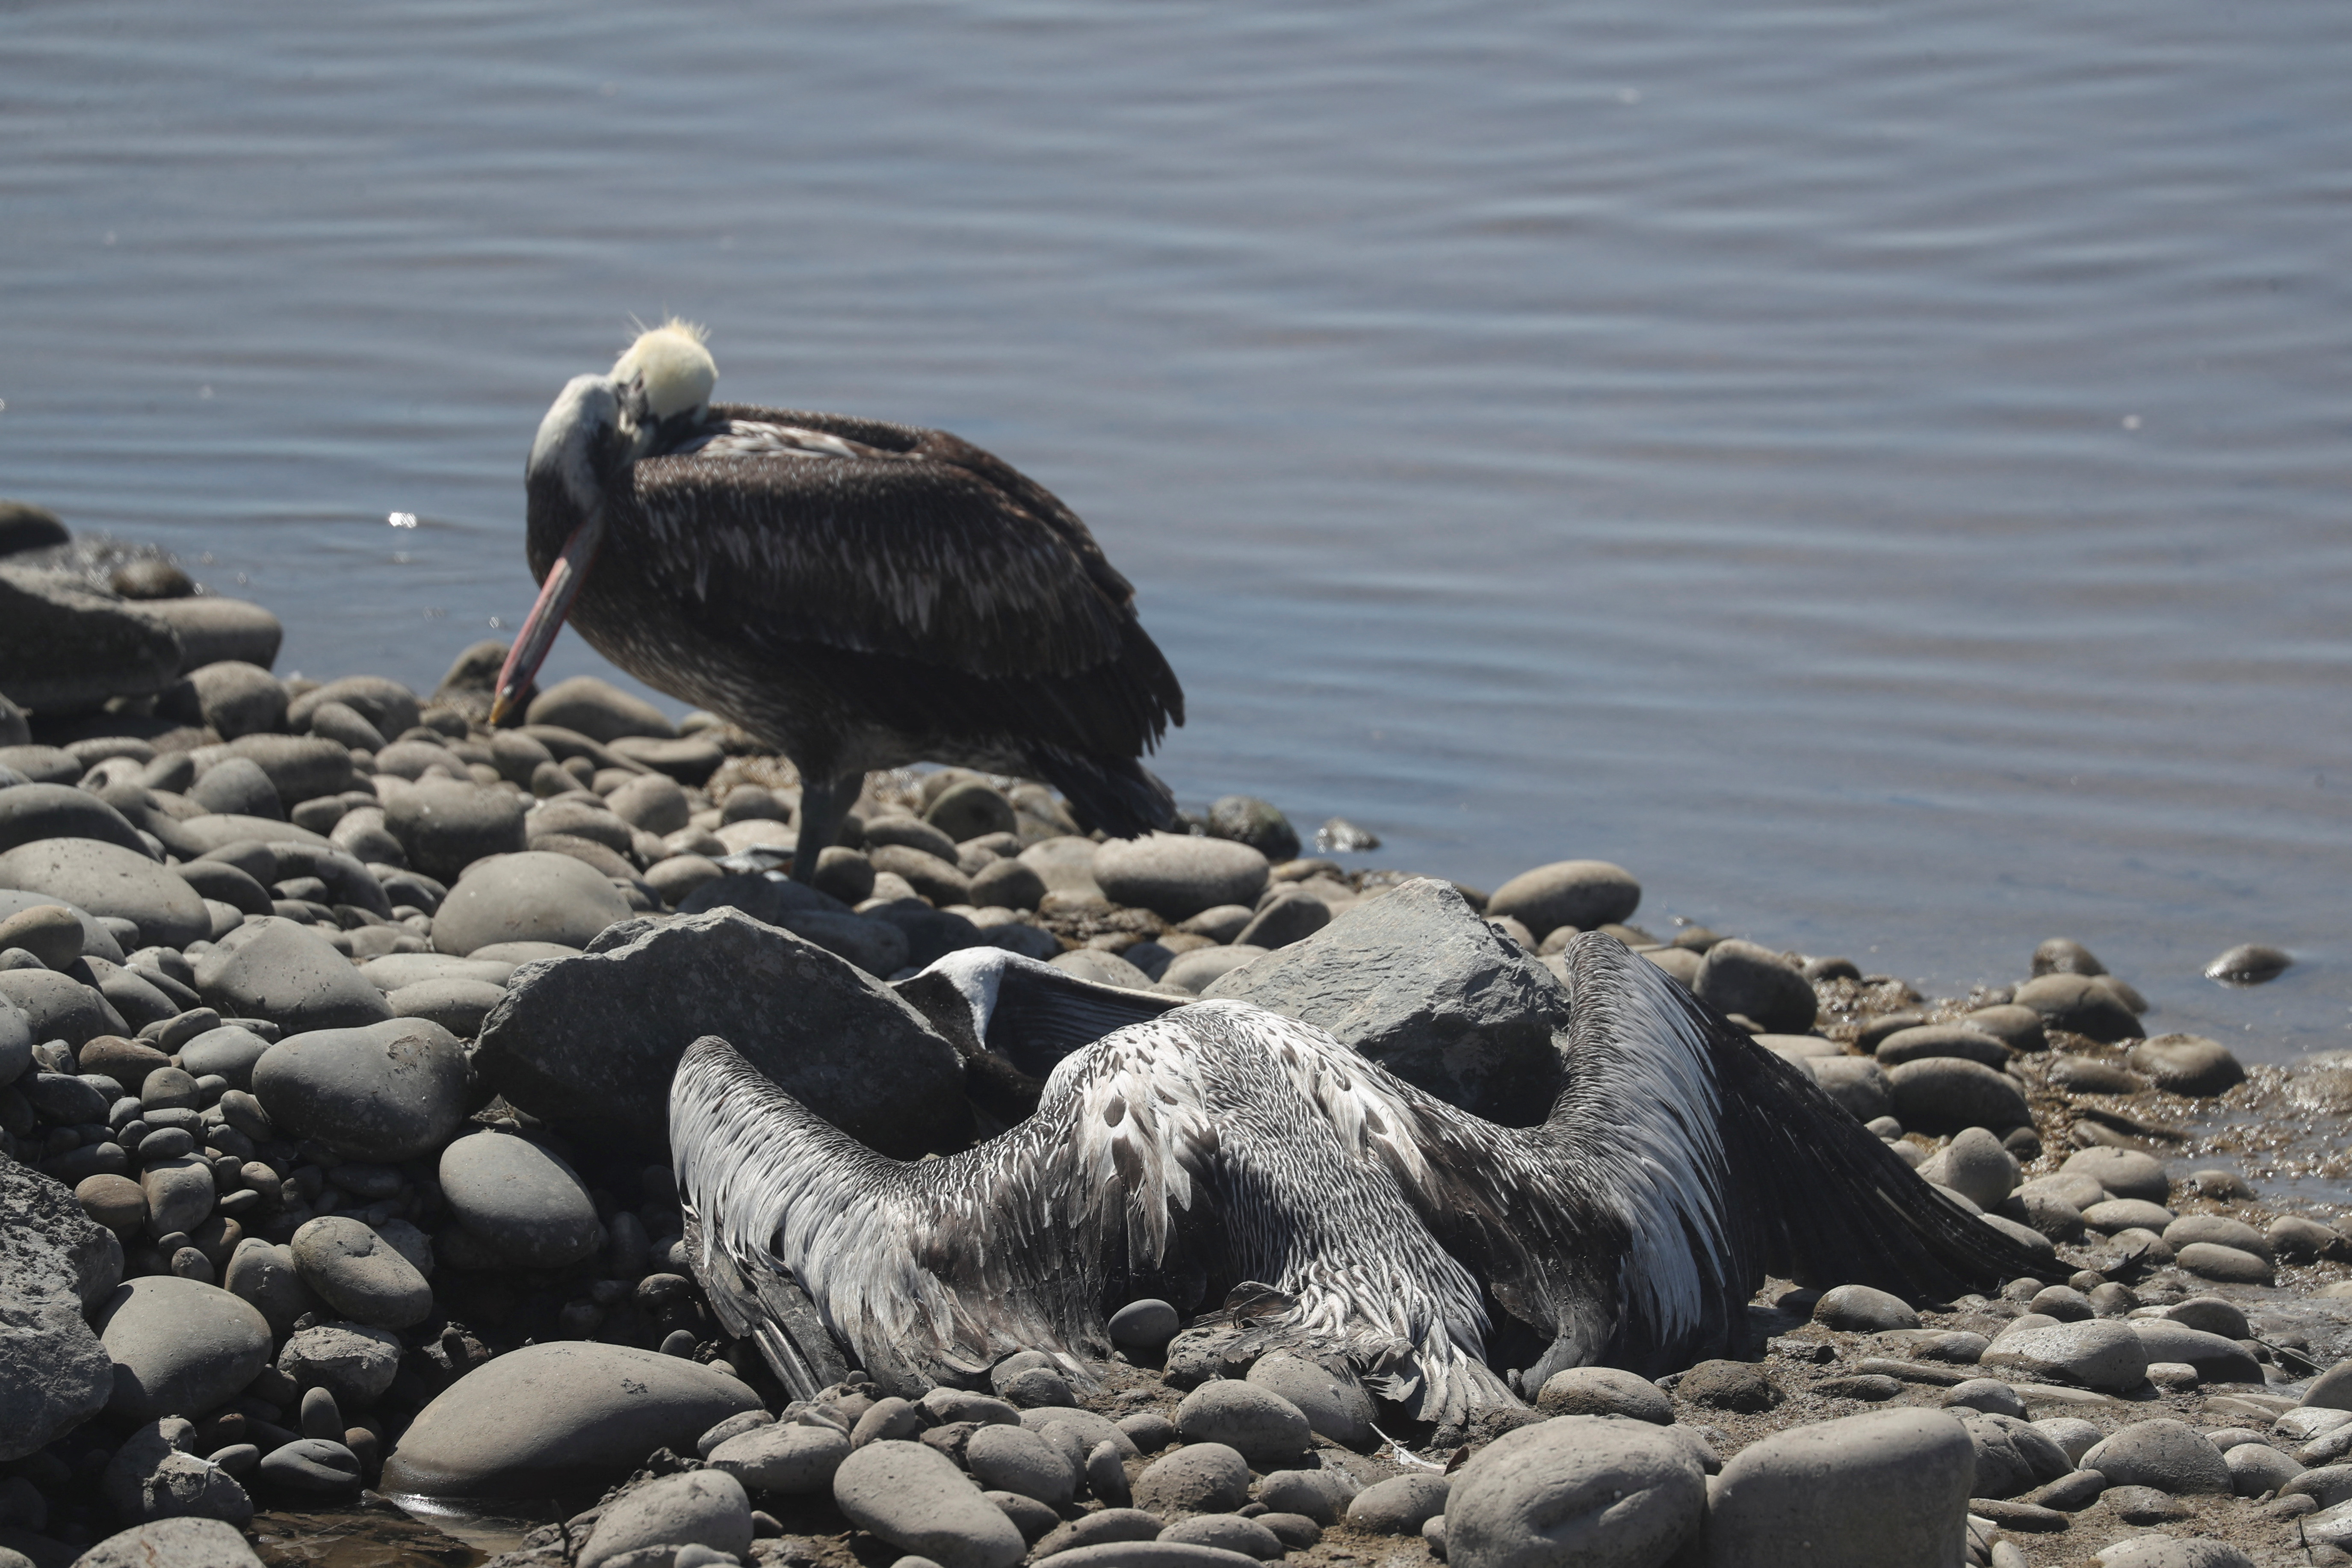 Bird flu kills sea lions and thousands of pelicans in Peru's protected areas